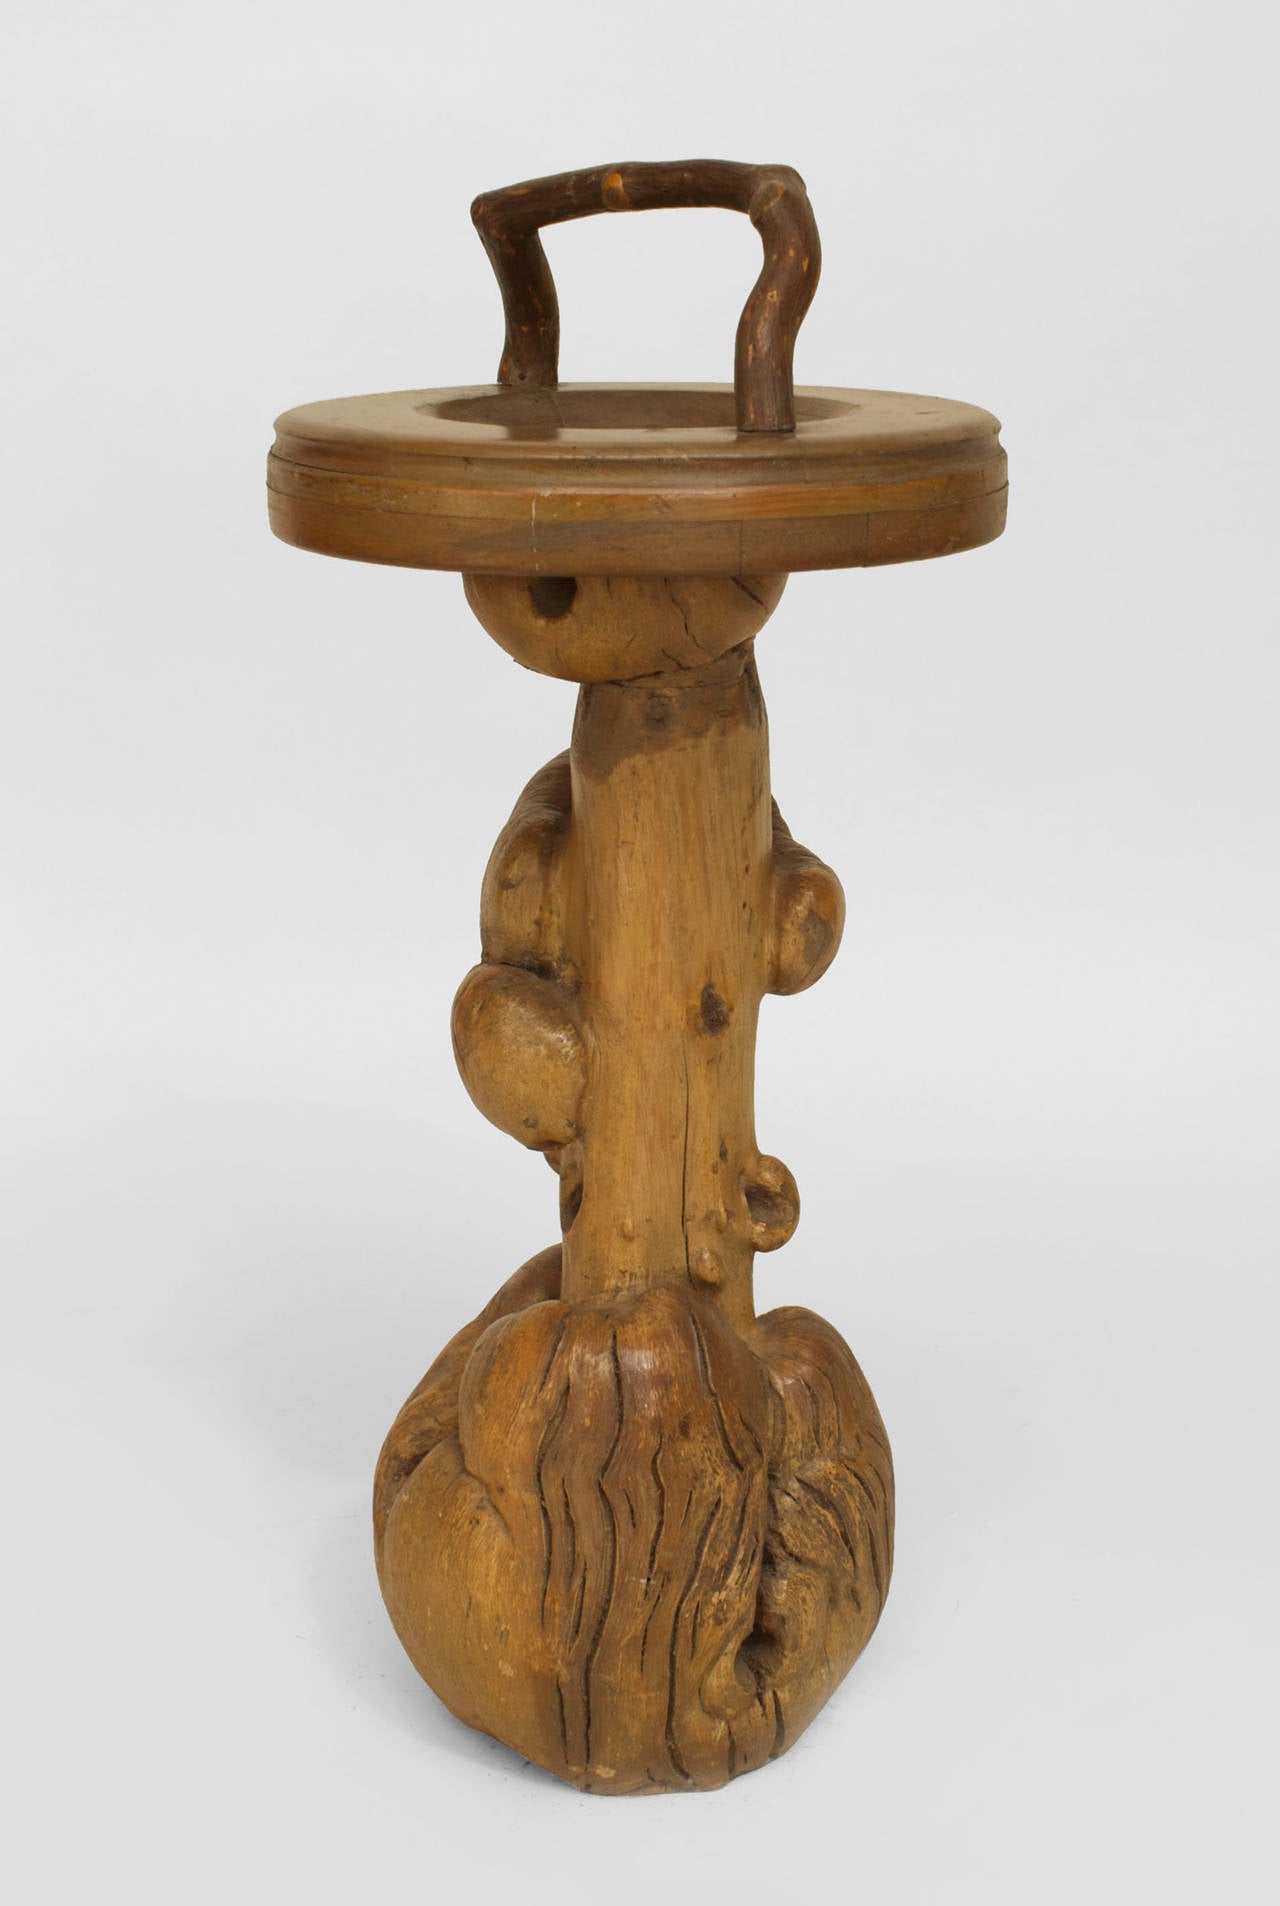 American Rustic (1930s) stand with a root form pedestal base supporting a round (ashtray) top with a handle (att: MOLESWORTH)
